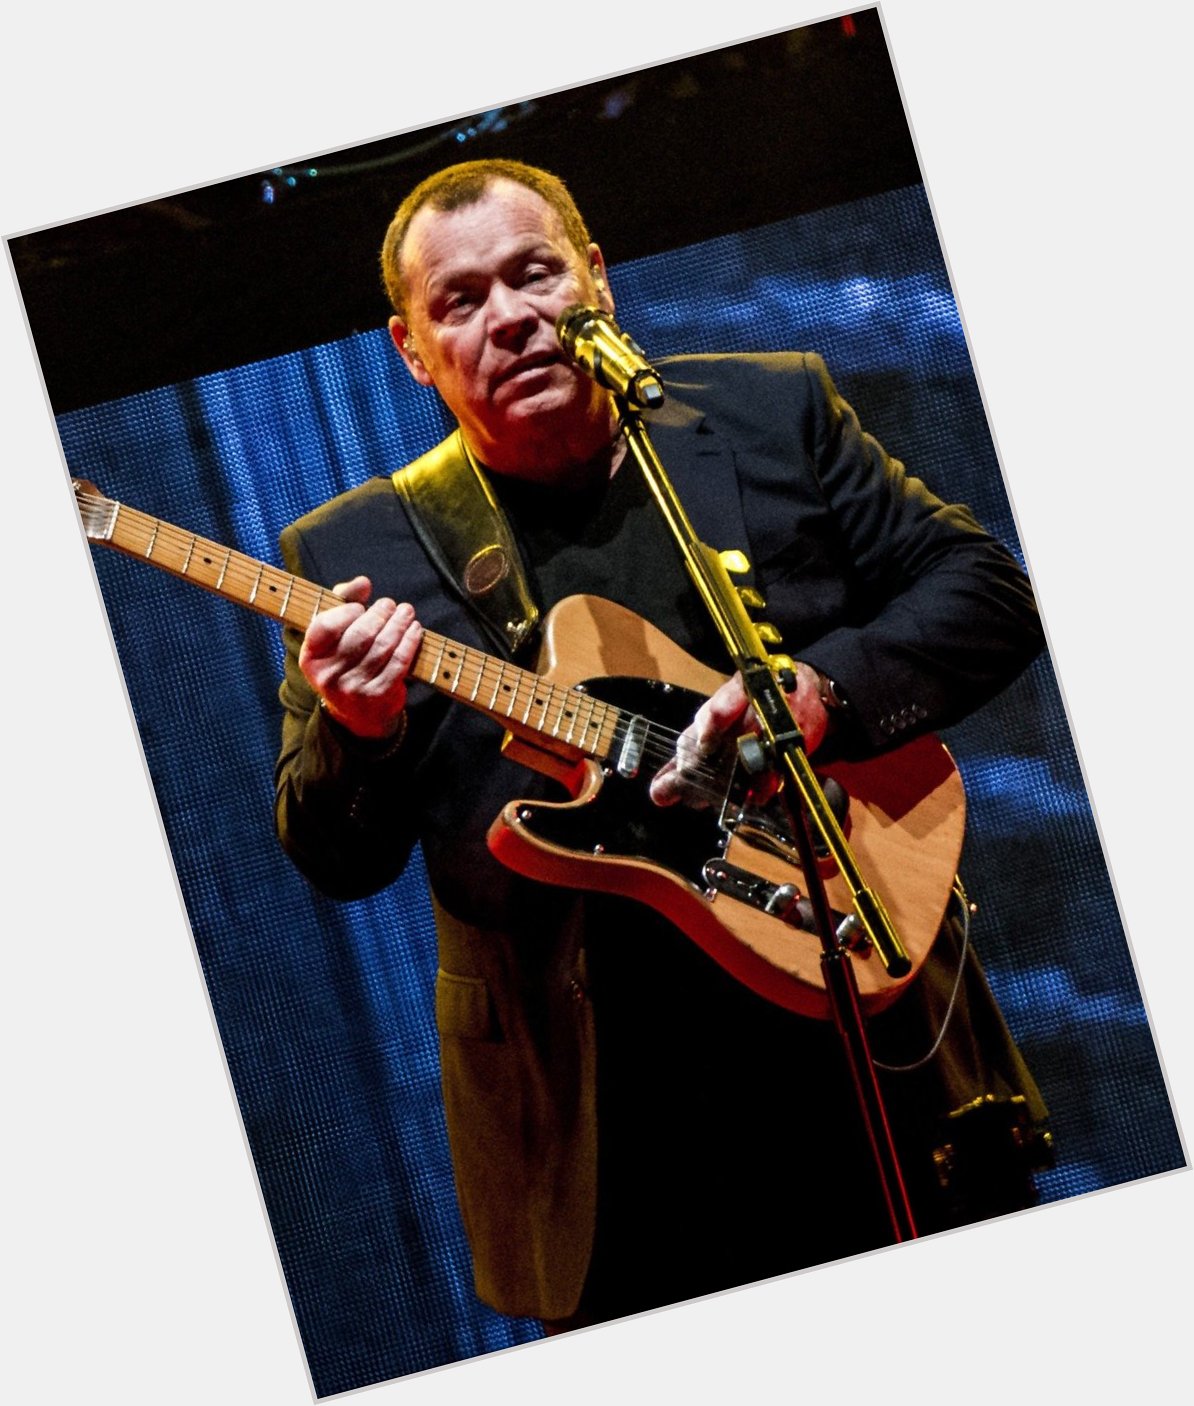 Please join me here at in wishing the one and only Ali Campbell a very Happy 62nd Birthday today  